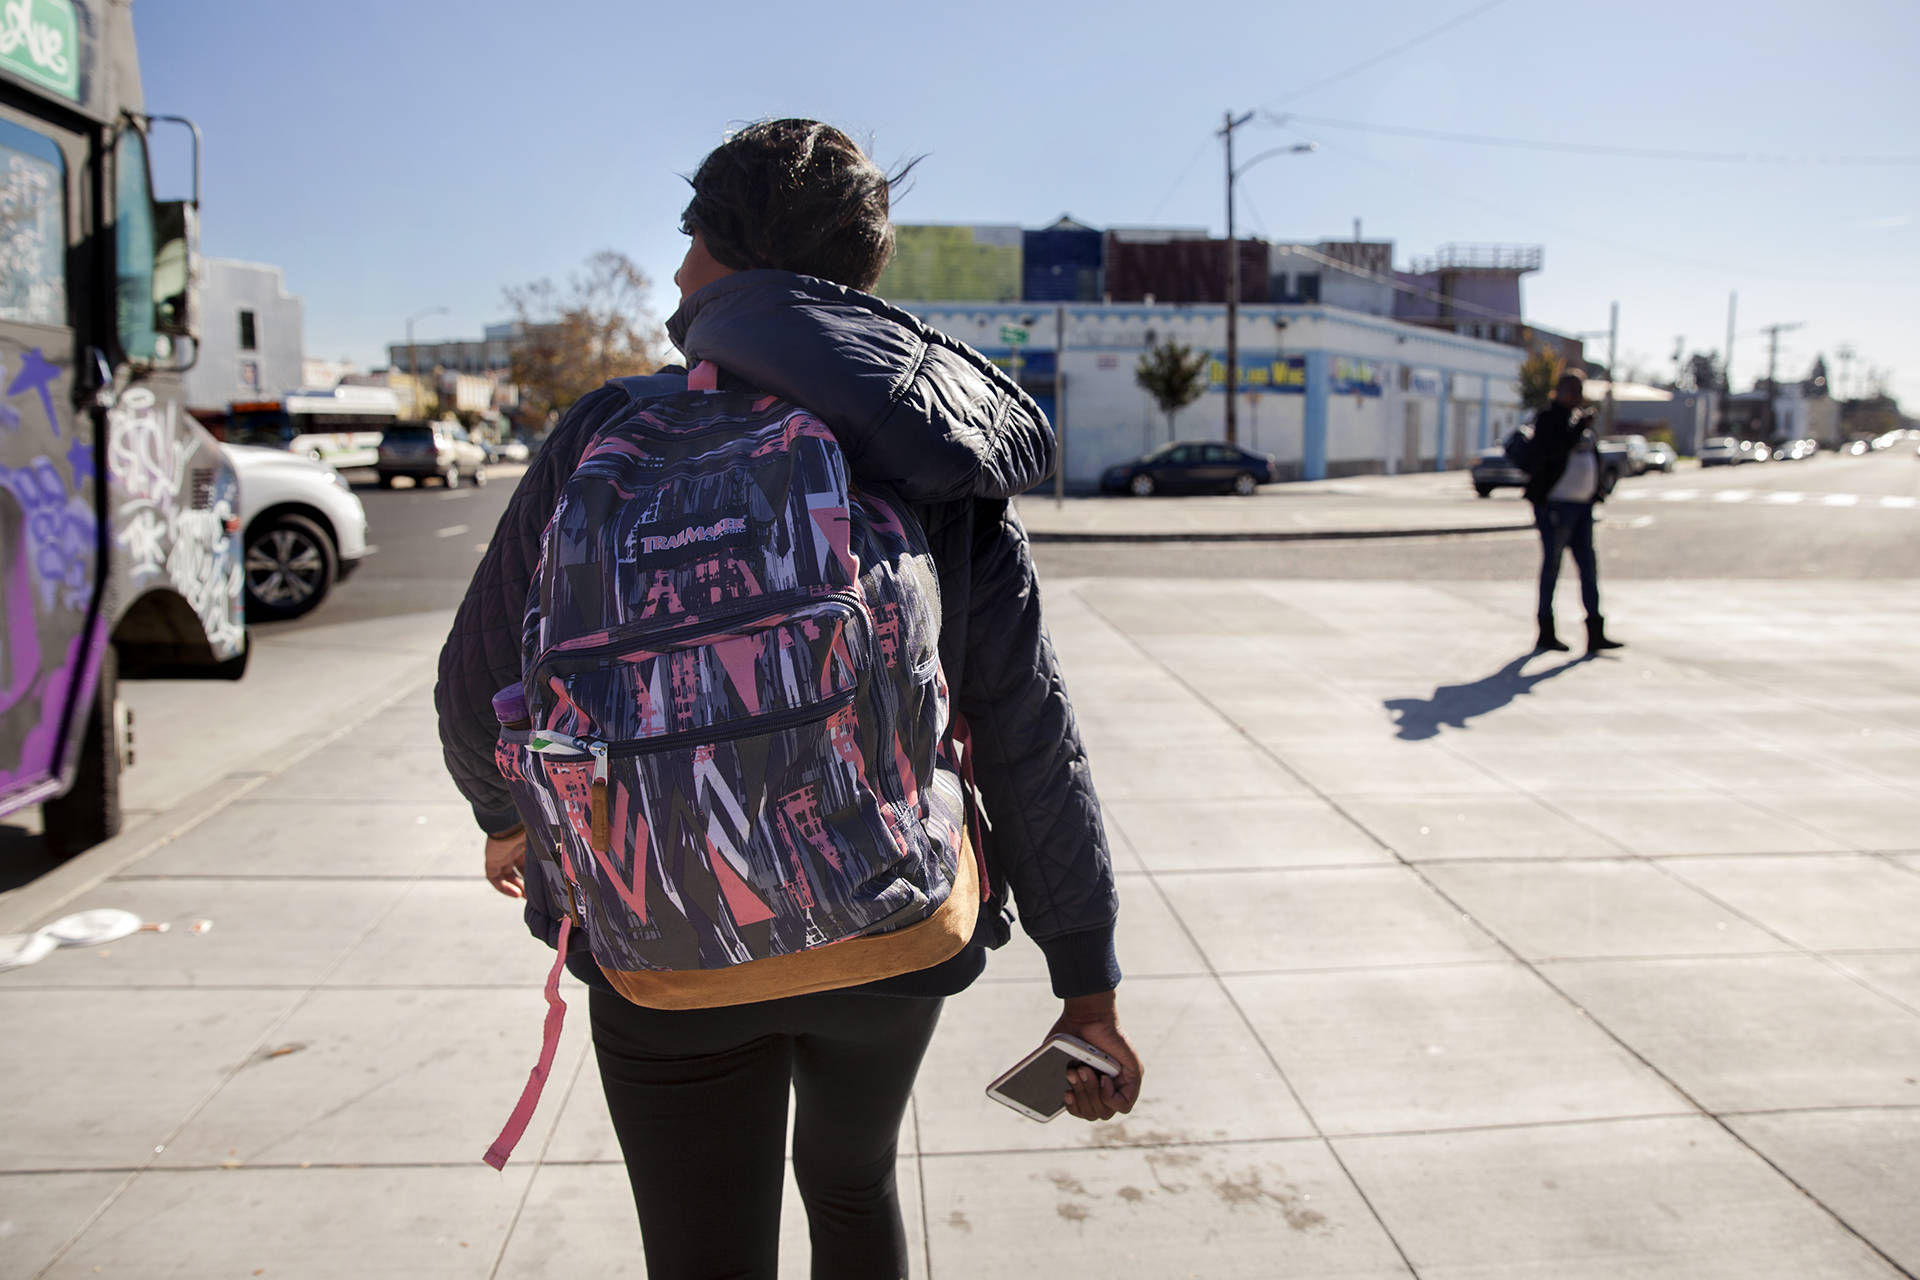 Brittany Jones, a student at Laney College, makes her way from class to her storage unit in West Oakland. Jones is currently homeless and spends up to three hours a day at her storage unit organizing her belongings, doing homework or relaxing. Brittany Hosea-Small/KQED